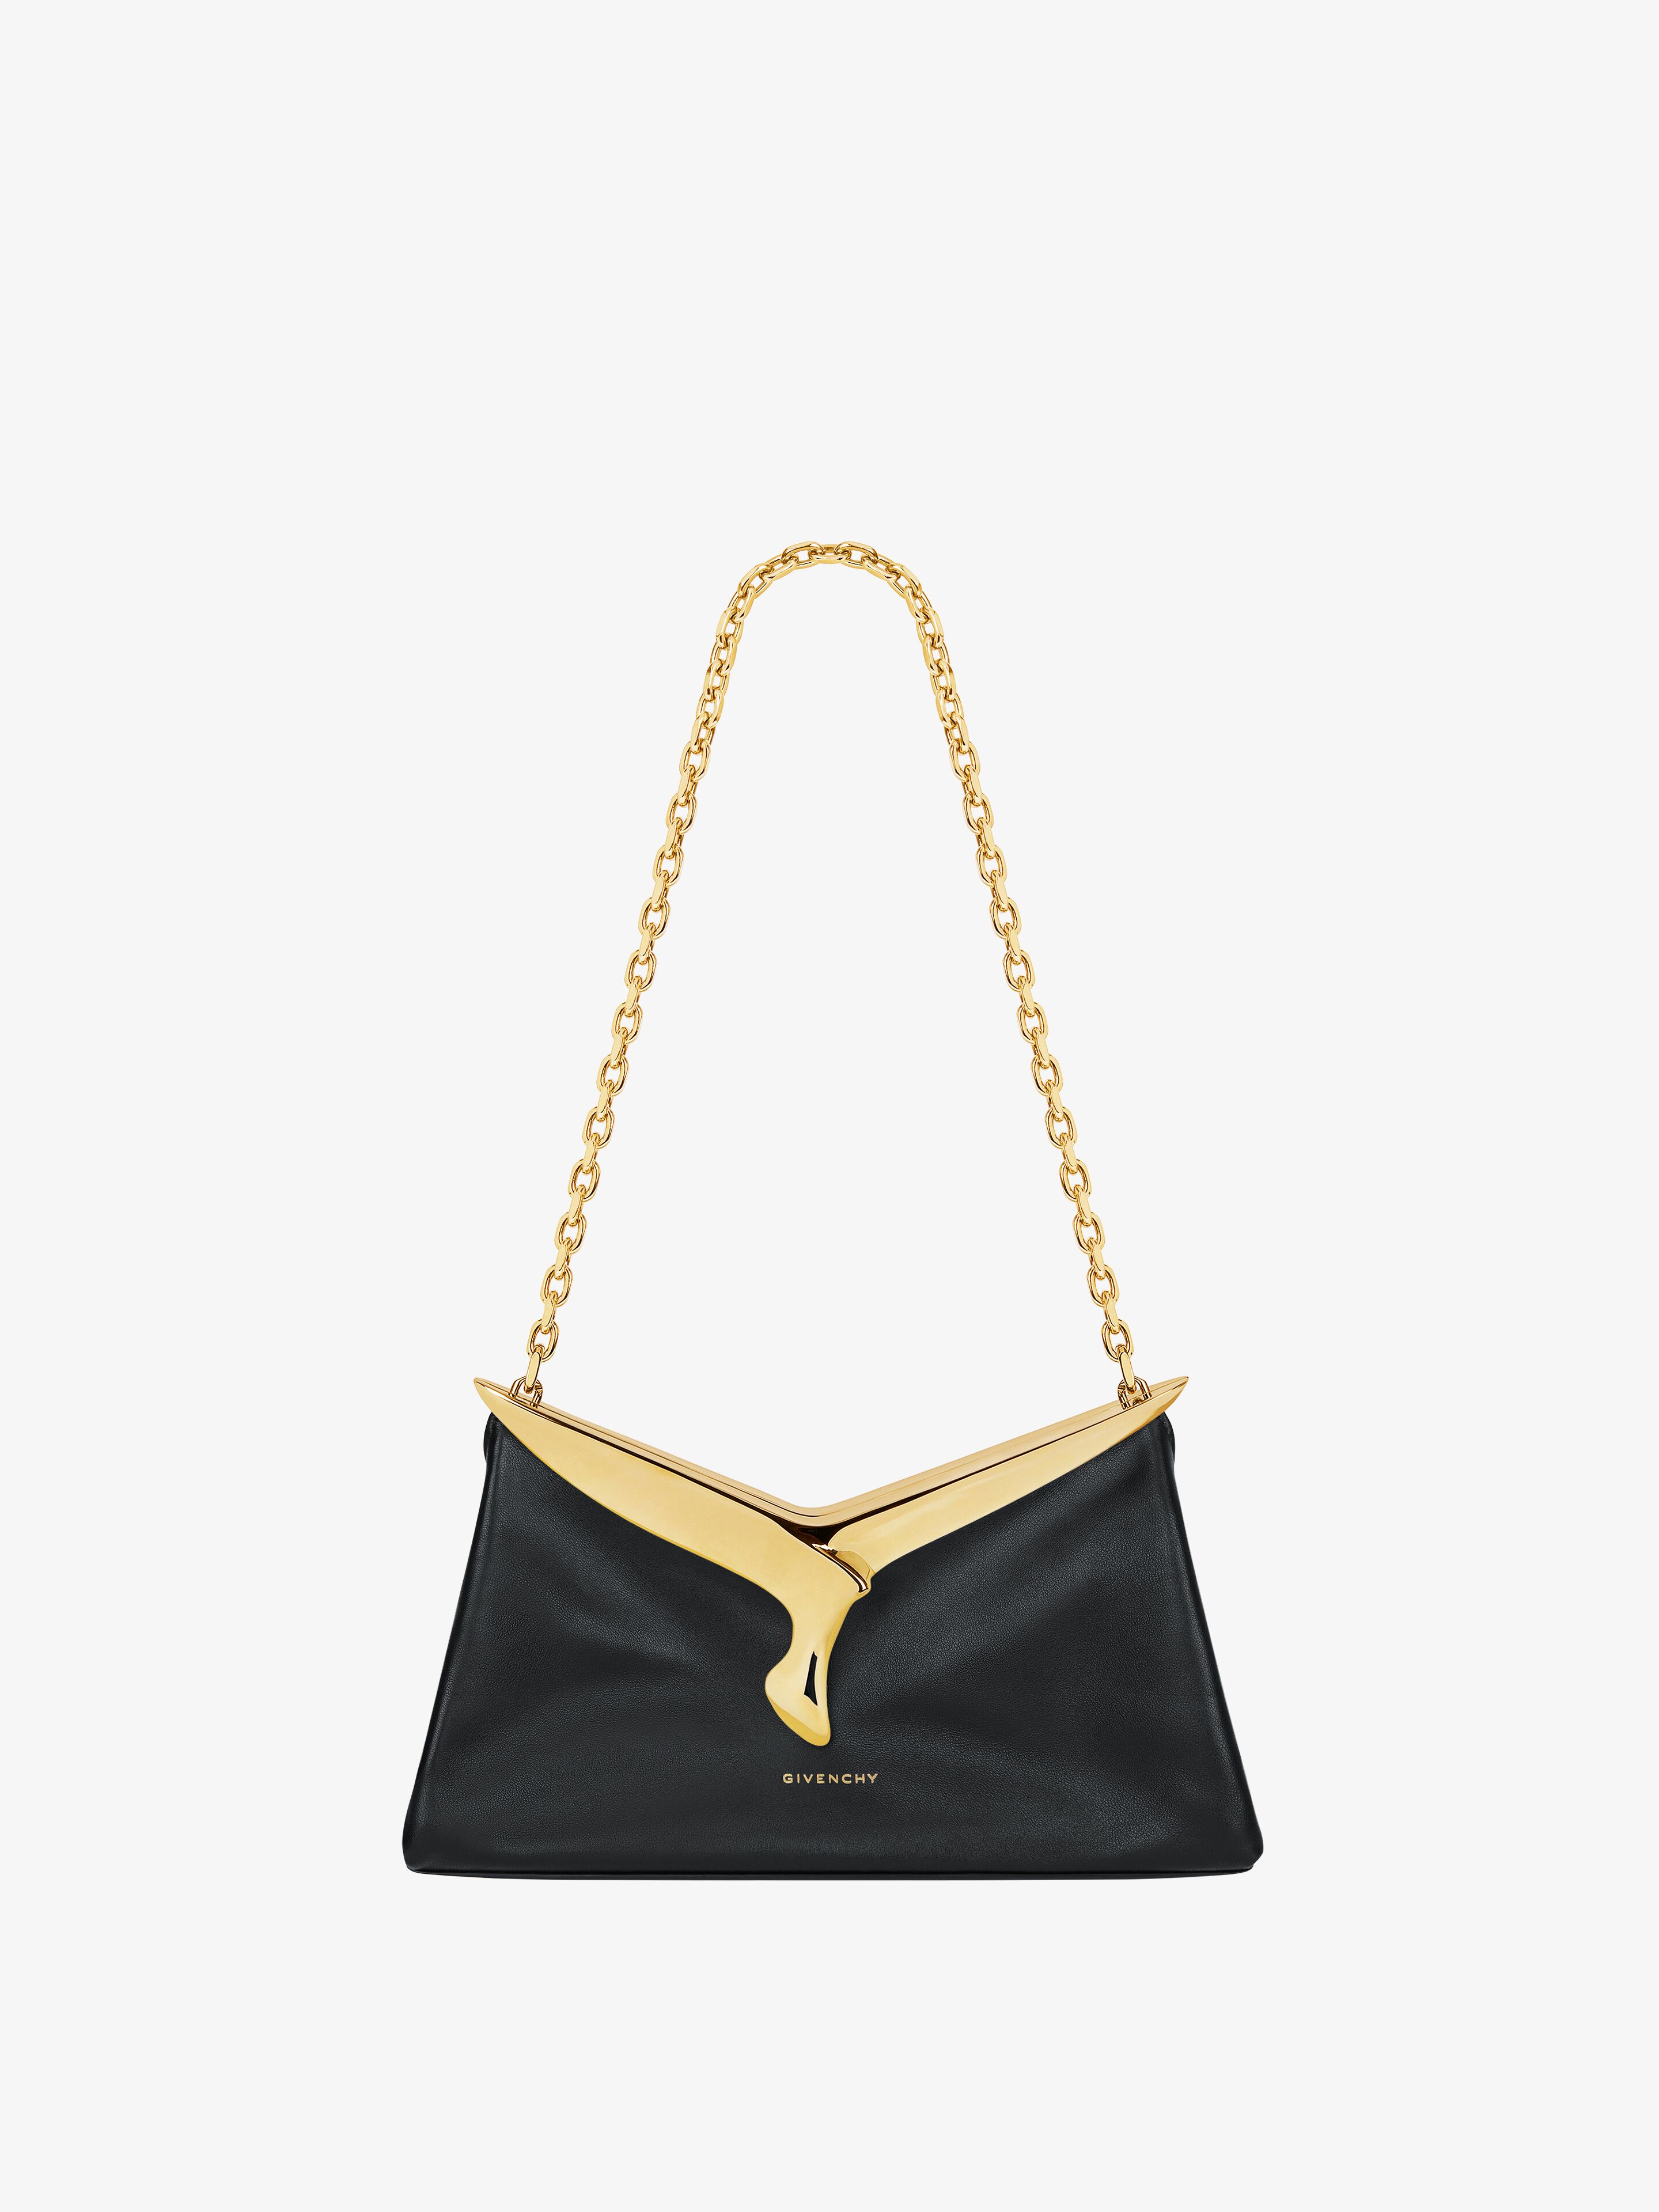 GIVENCHY CUT OUT BIRD BAG IN NAPPA LEATHER